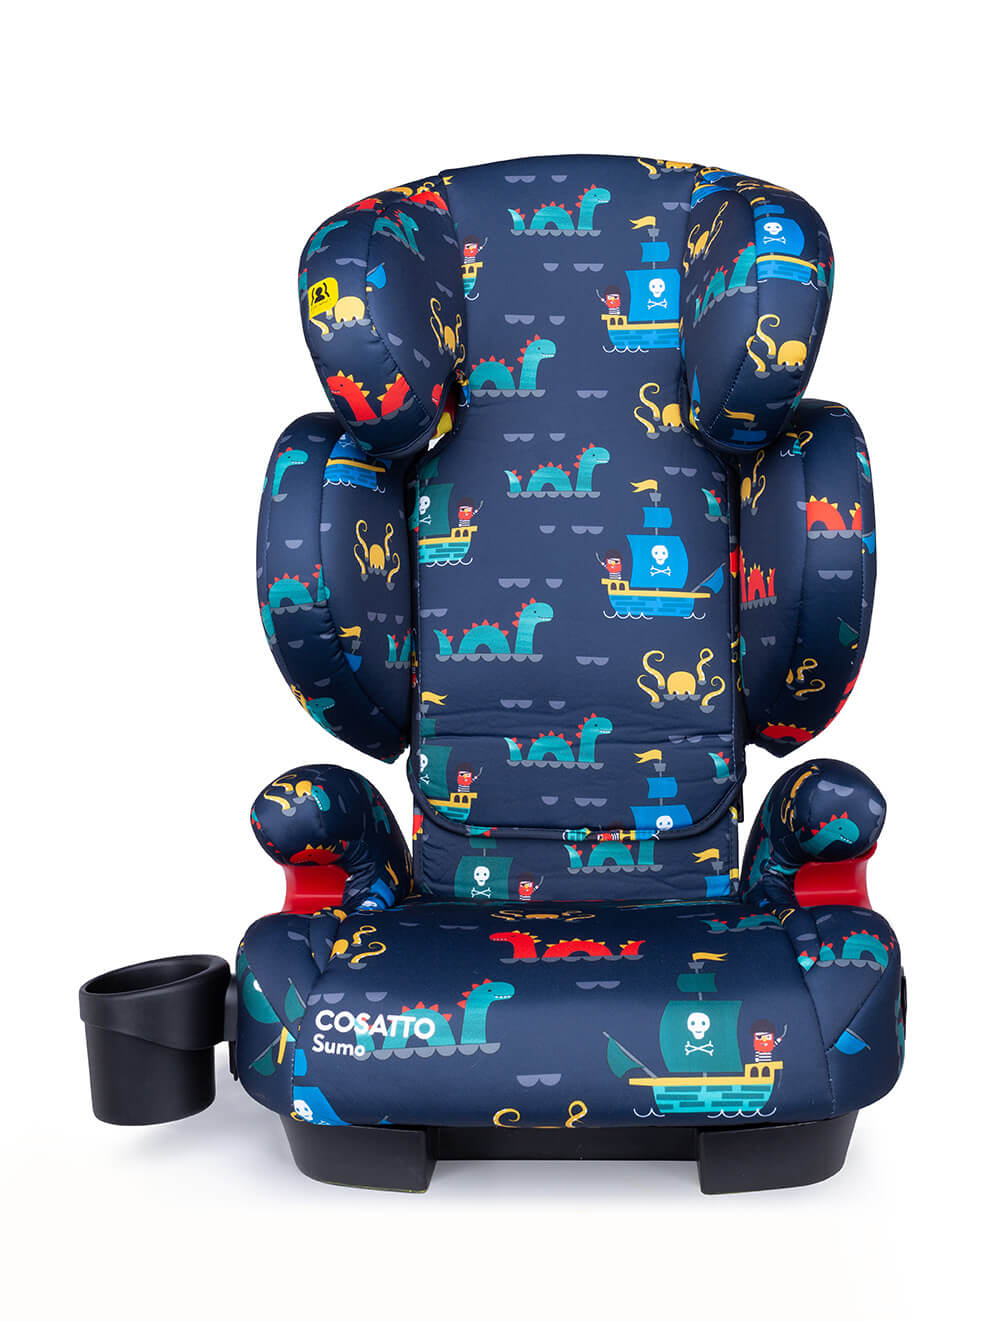 Sumo Group 2 3 Isofit Car Seat Sea Monsters